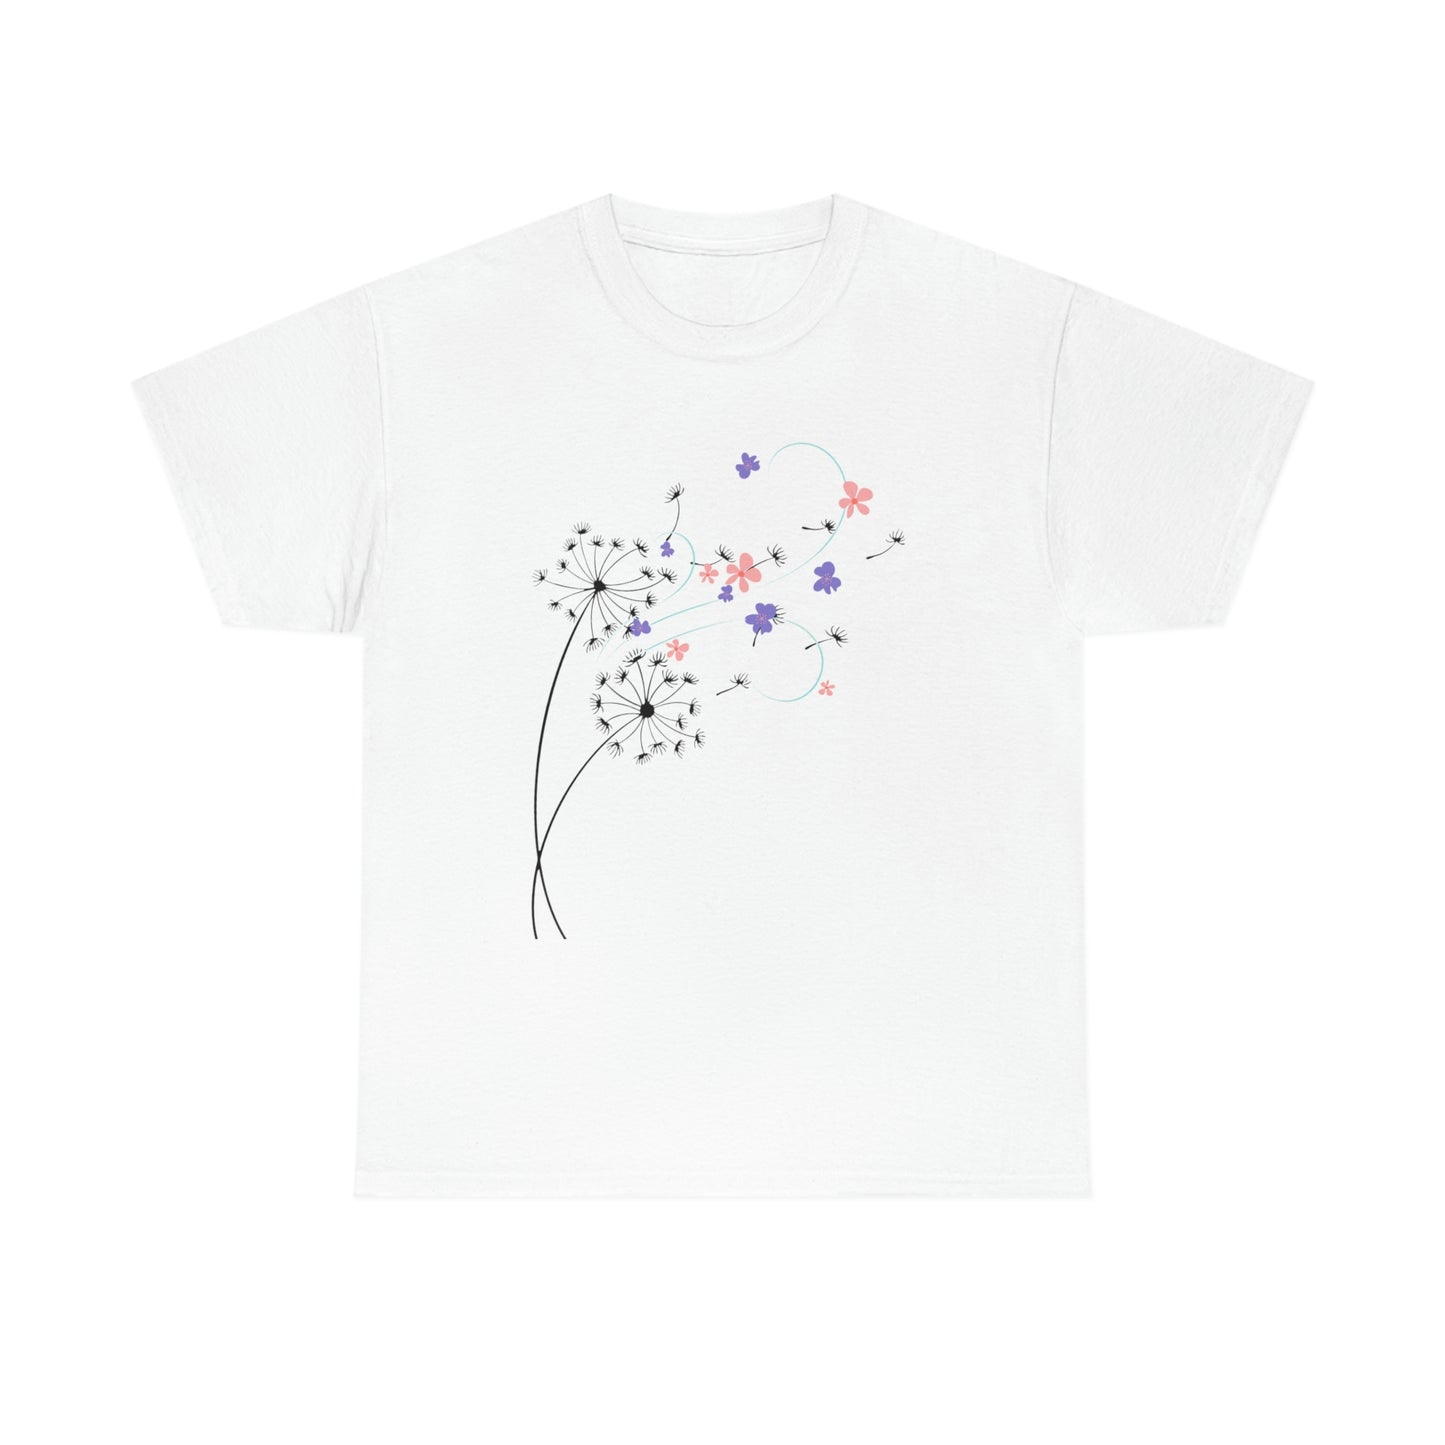 ‘Wind & Wishes’ Printed Front & Back Unisex Heavy Cotton Tee